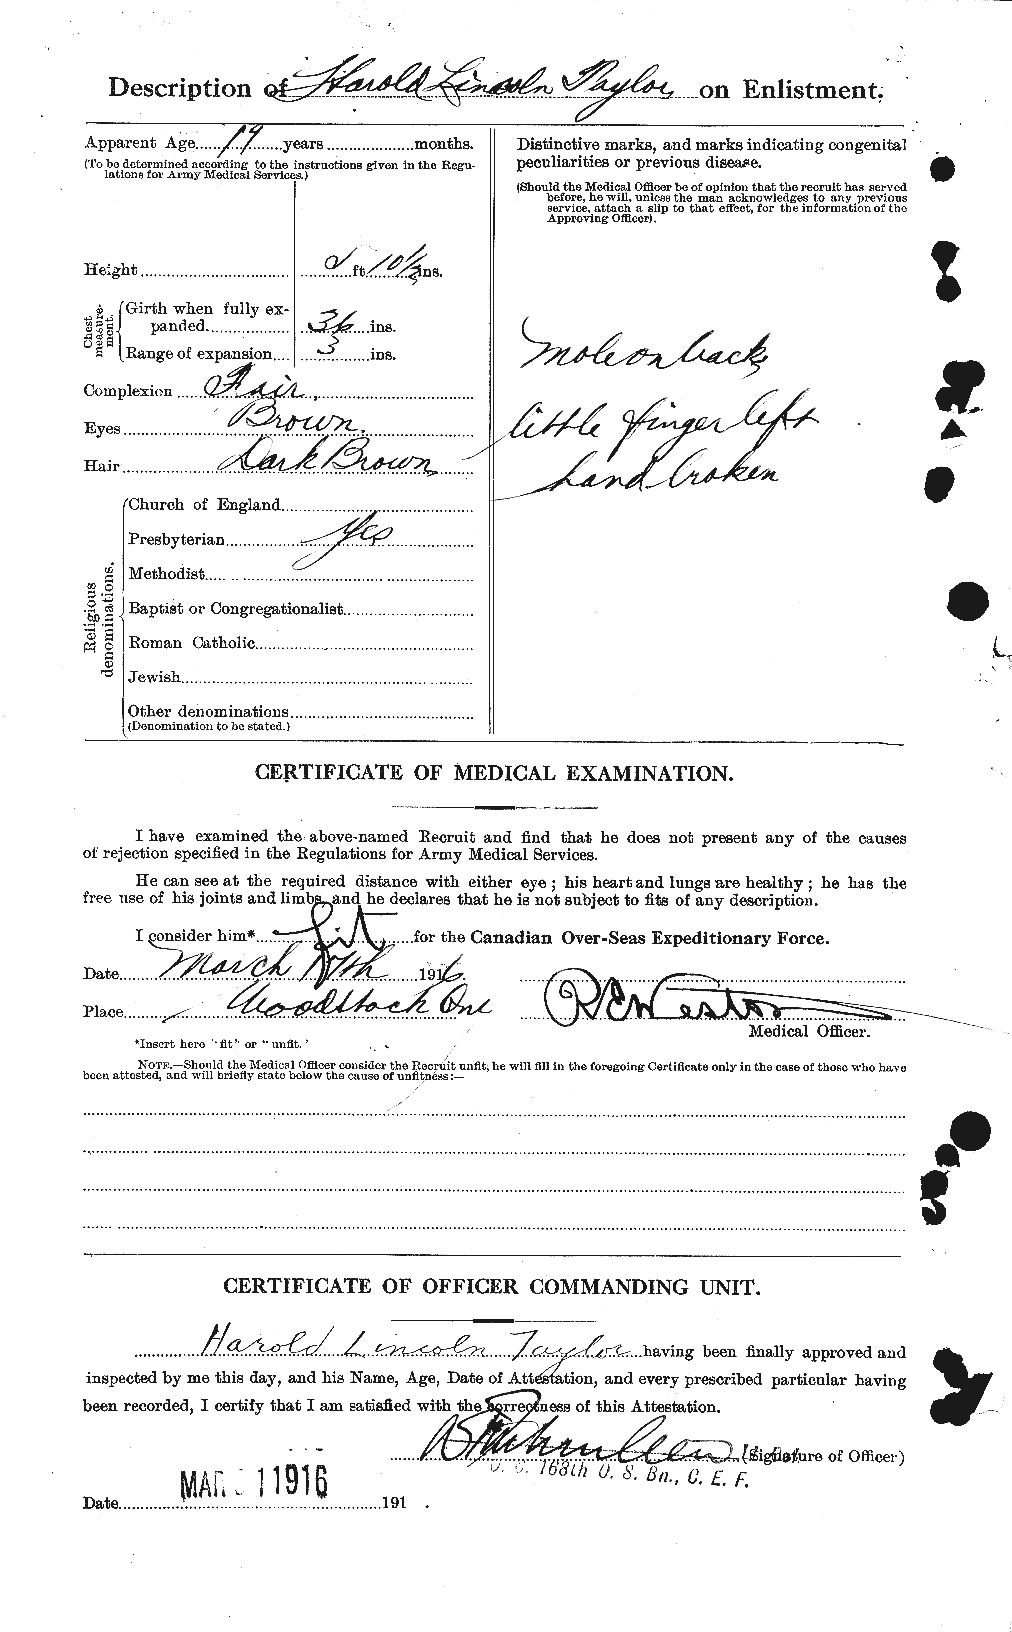 Personnel Records of the First World War - CEF 626428b